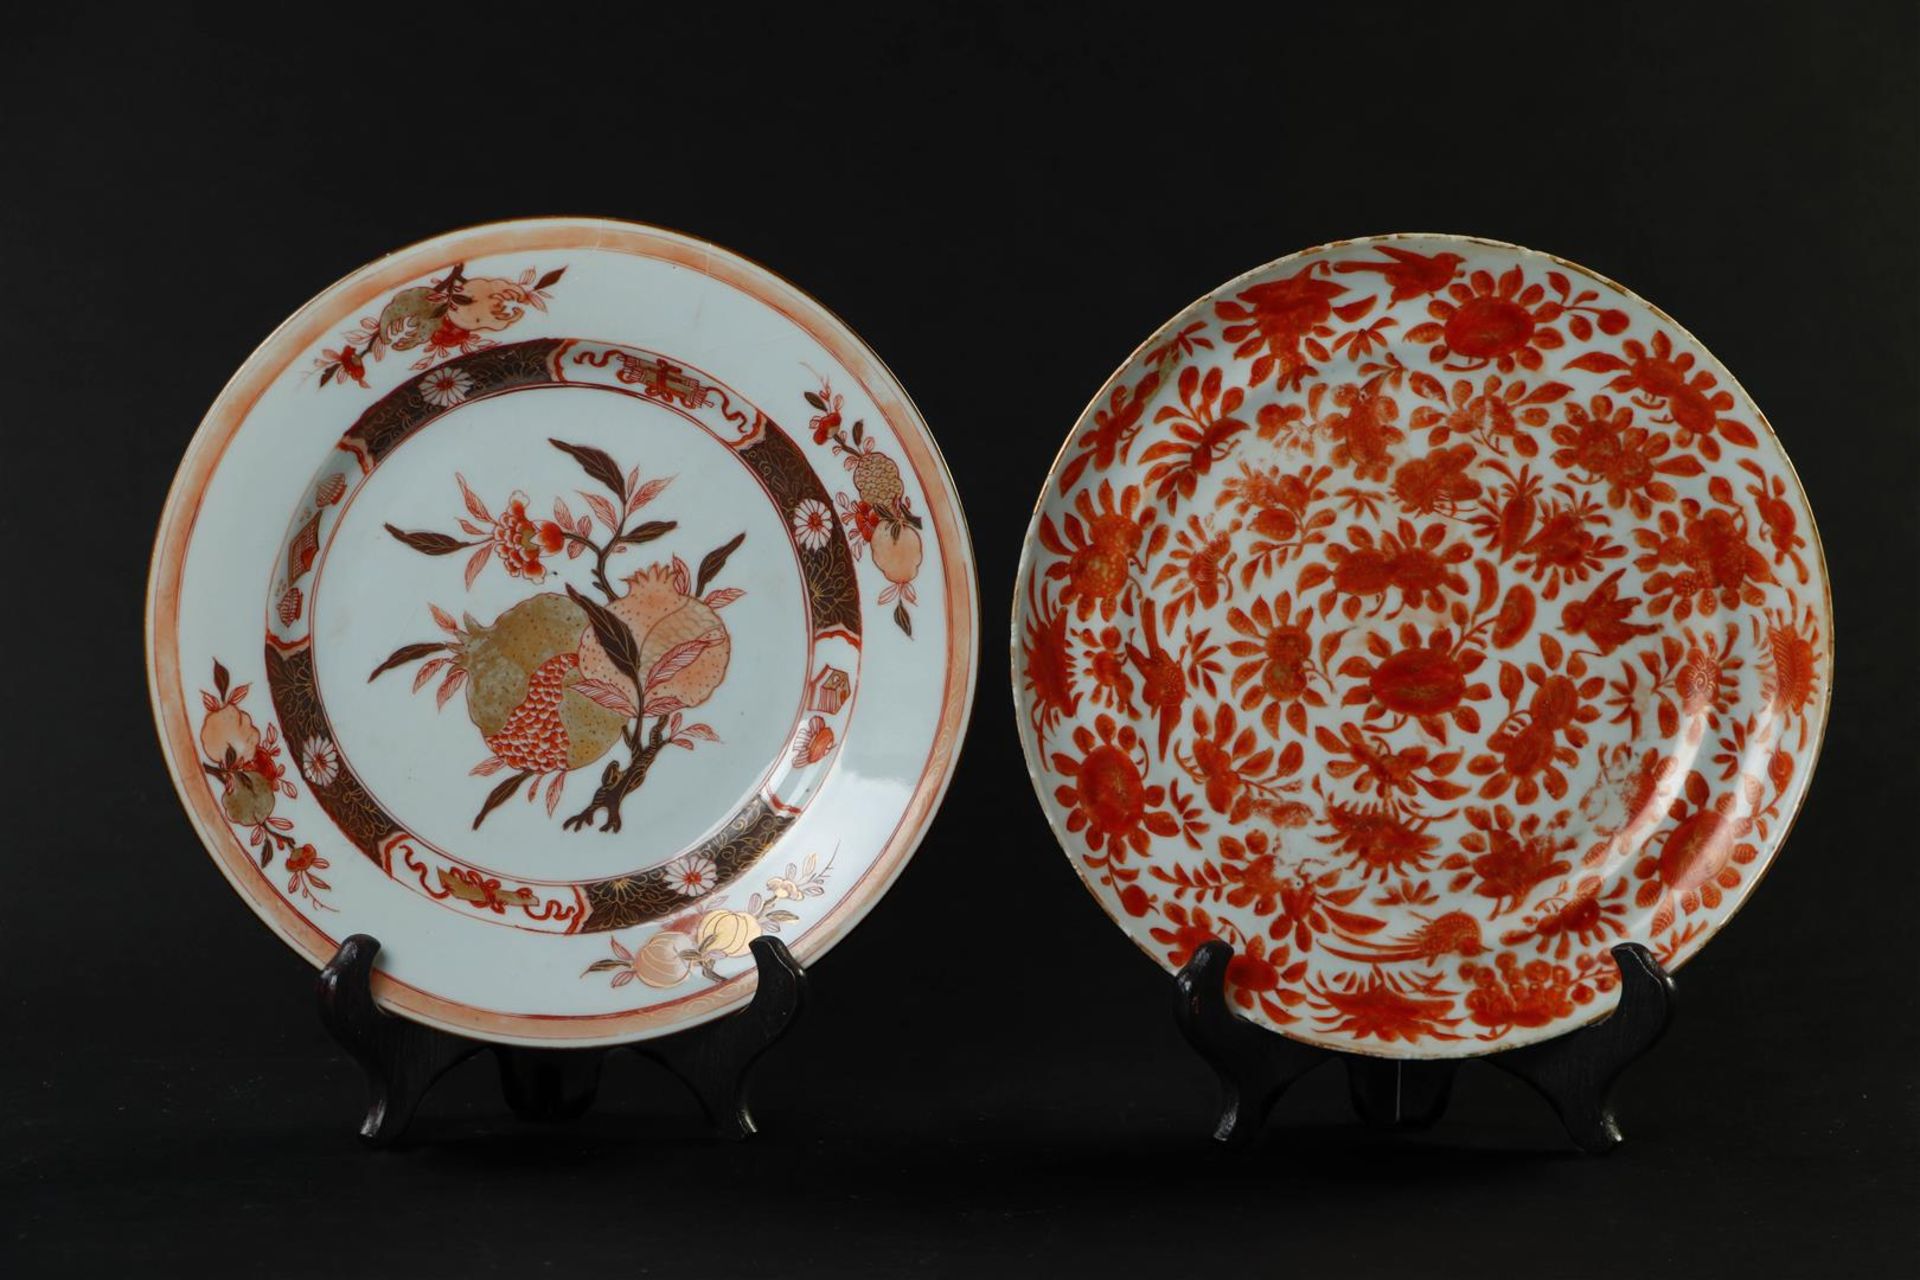 Two porcelain plates of milk & Blood, pomegranate, valuables, second scatter flowers, birds, peach. 